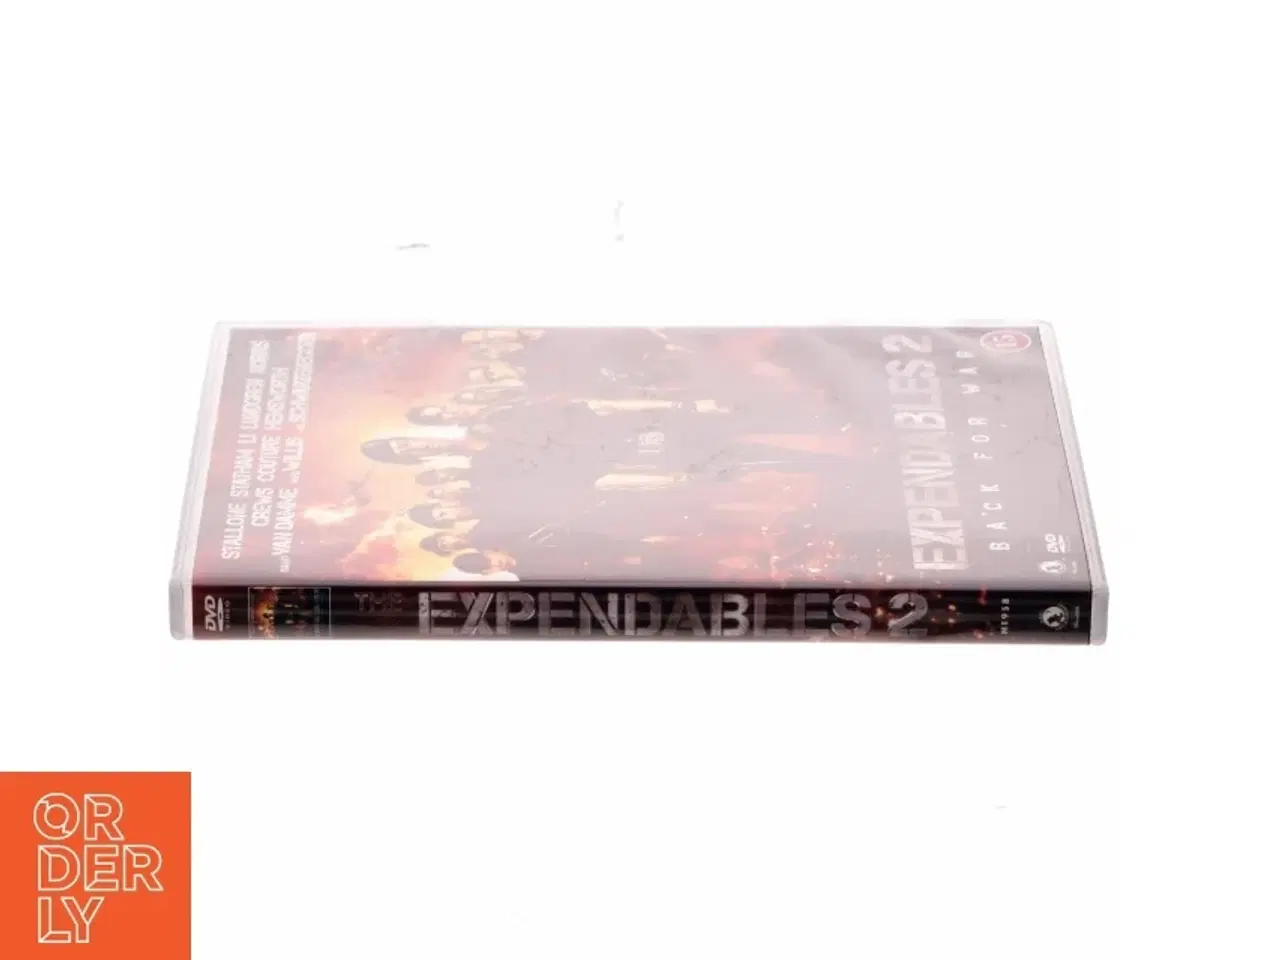 Billede 2 - The Expendables 2 (dvd)